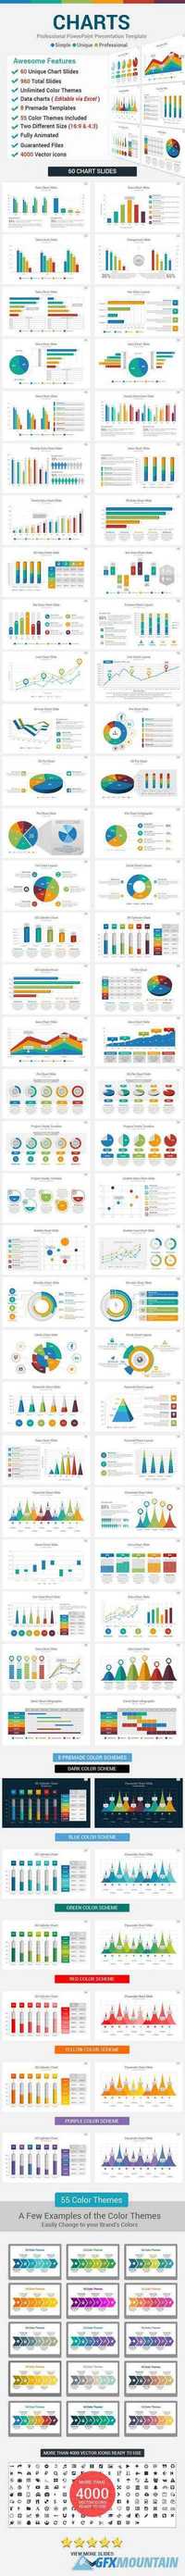 GraphicRiver - Data Charts PowerPoint Presentation Template 12522804